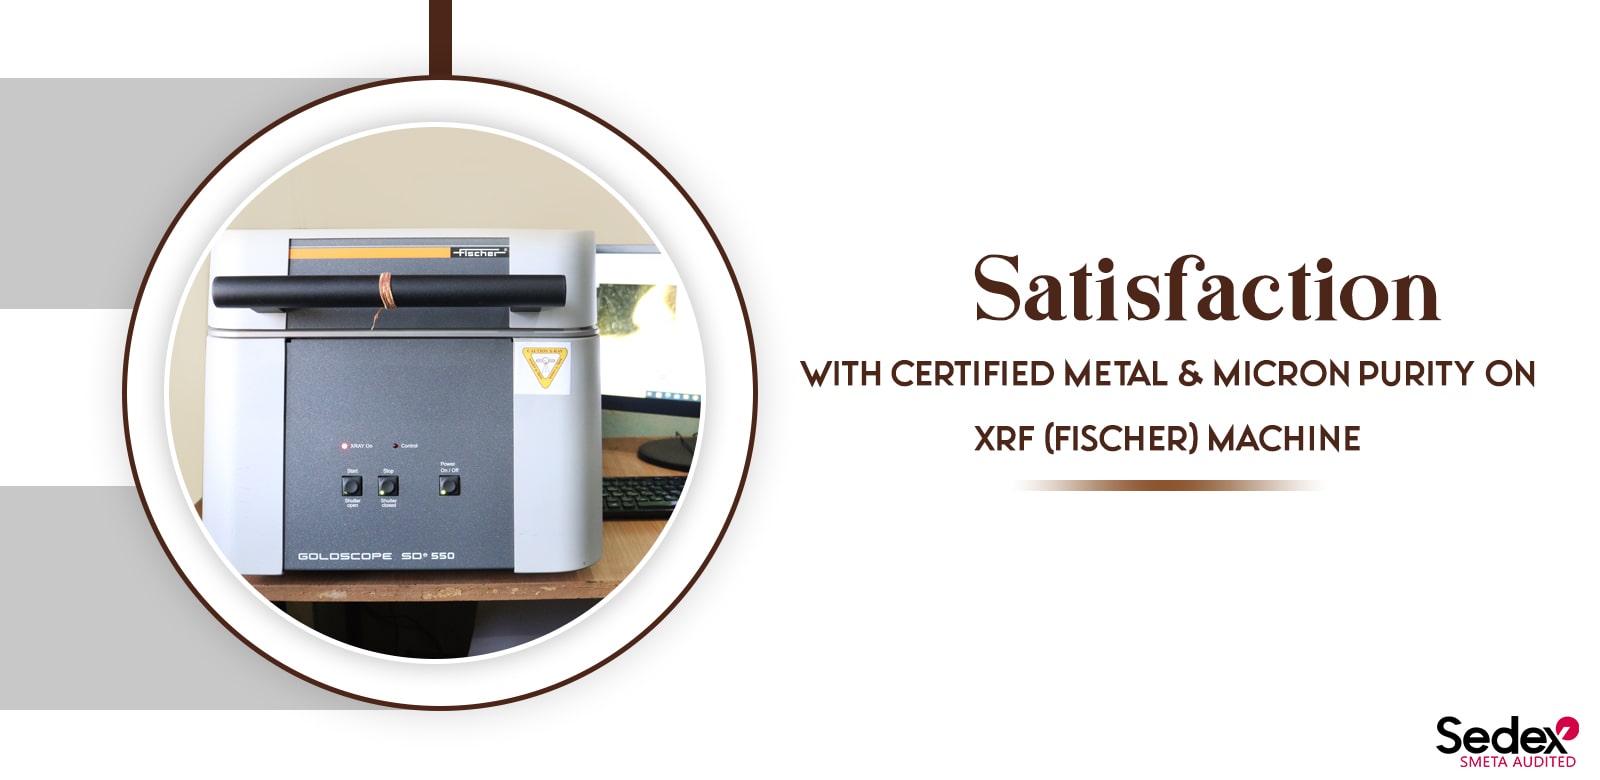 100% Satisfaction with Certified Metal & Micron Purity on XRF (Fischer) Machine